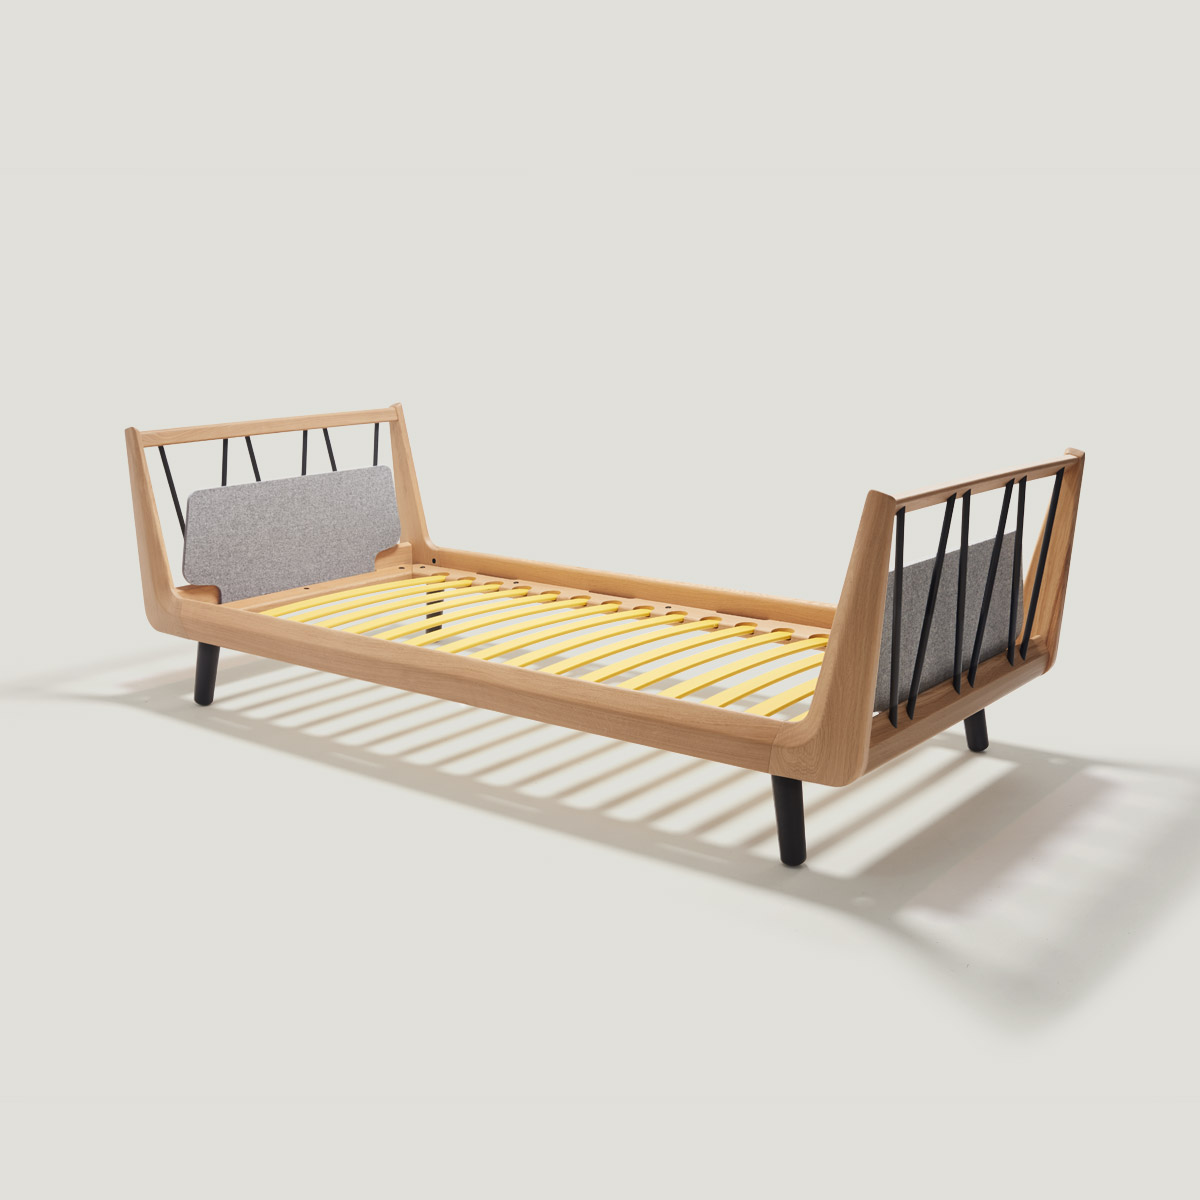 VII classic single bed